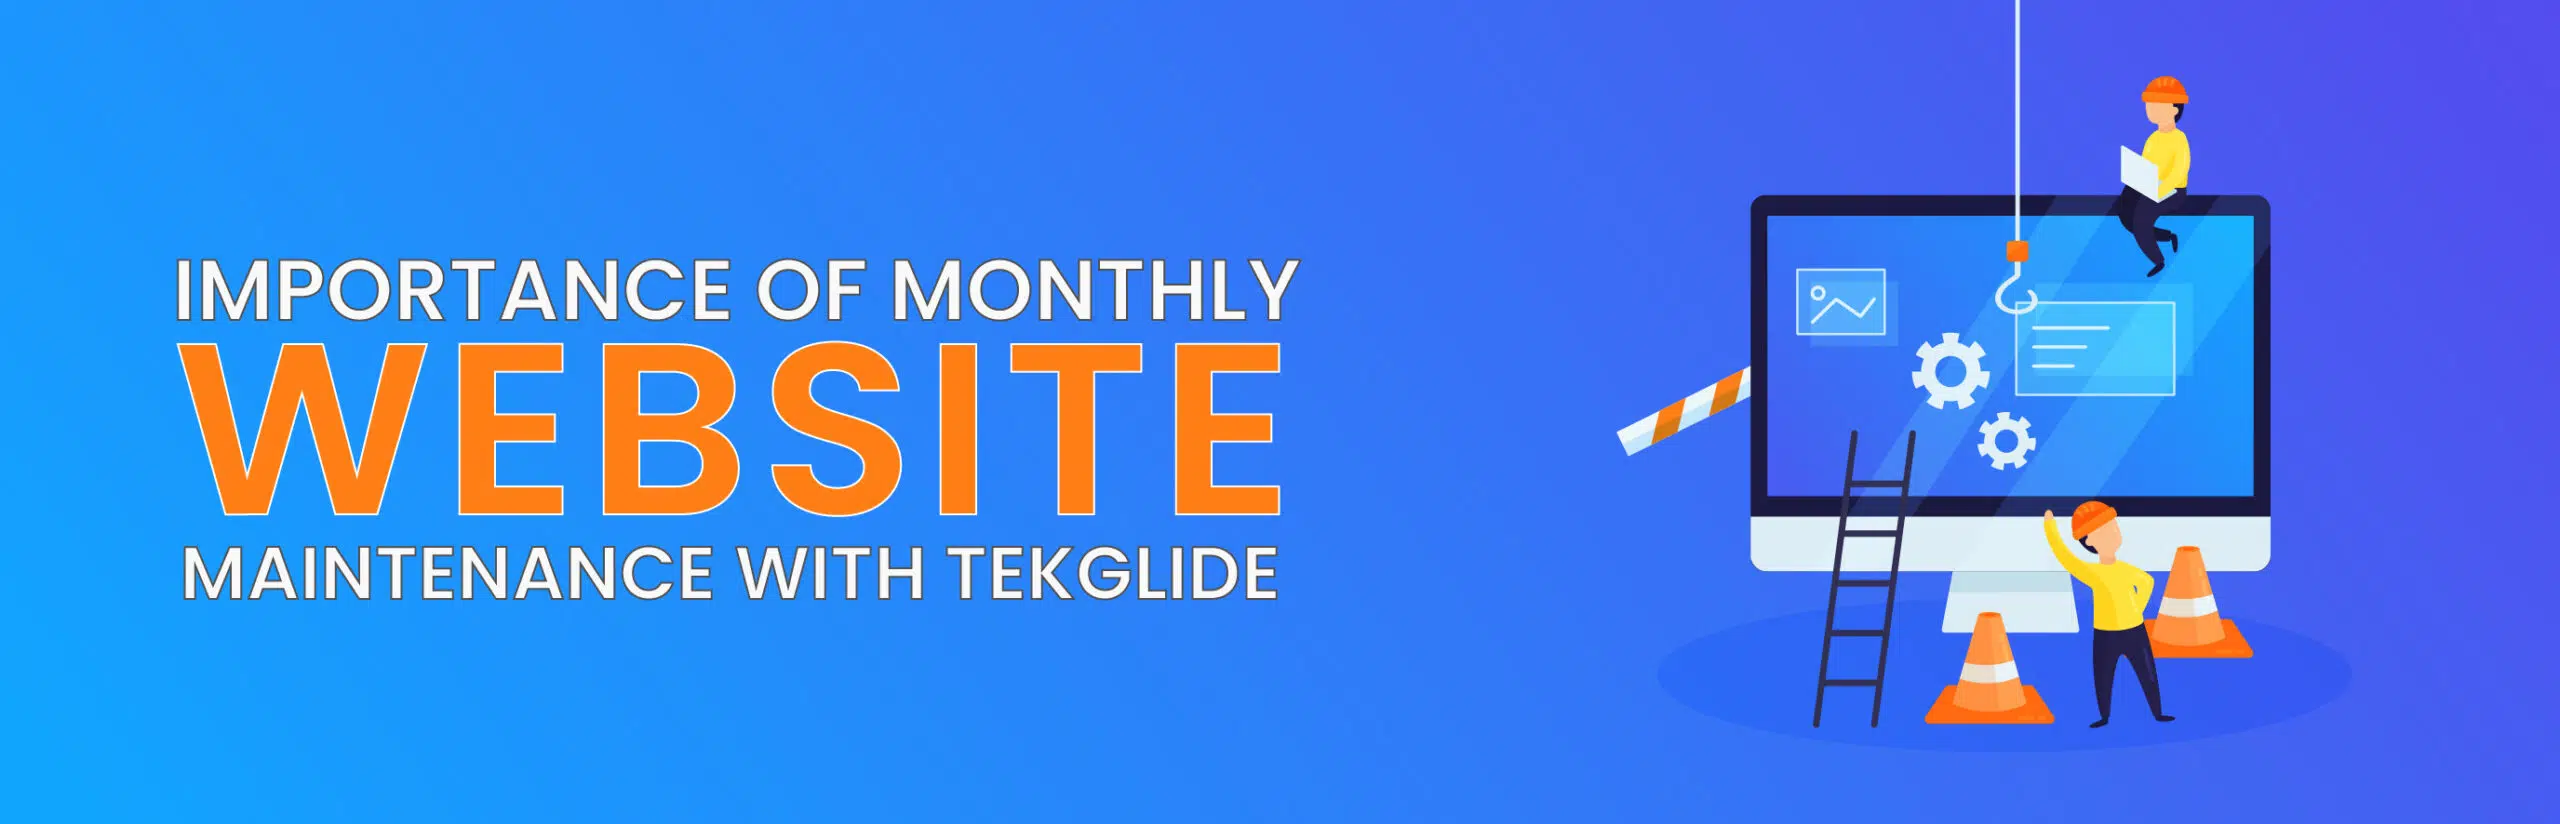 Importance of Monthly website maintenance with Tekglide